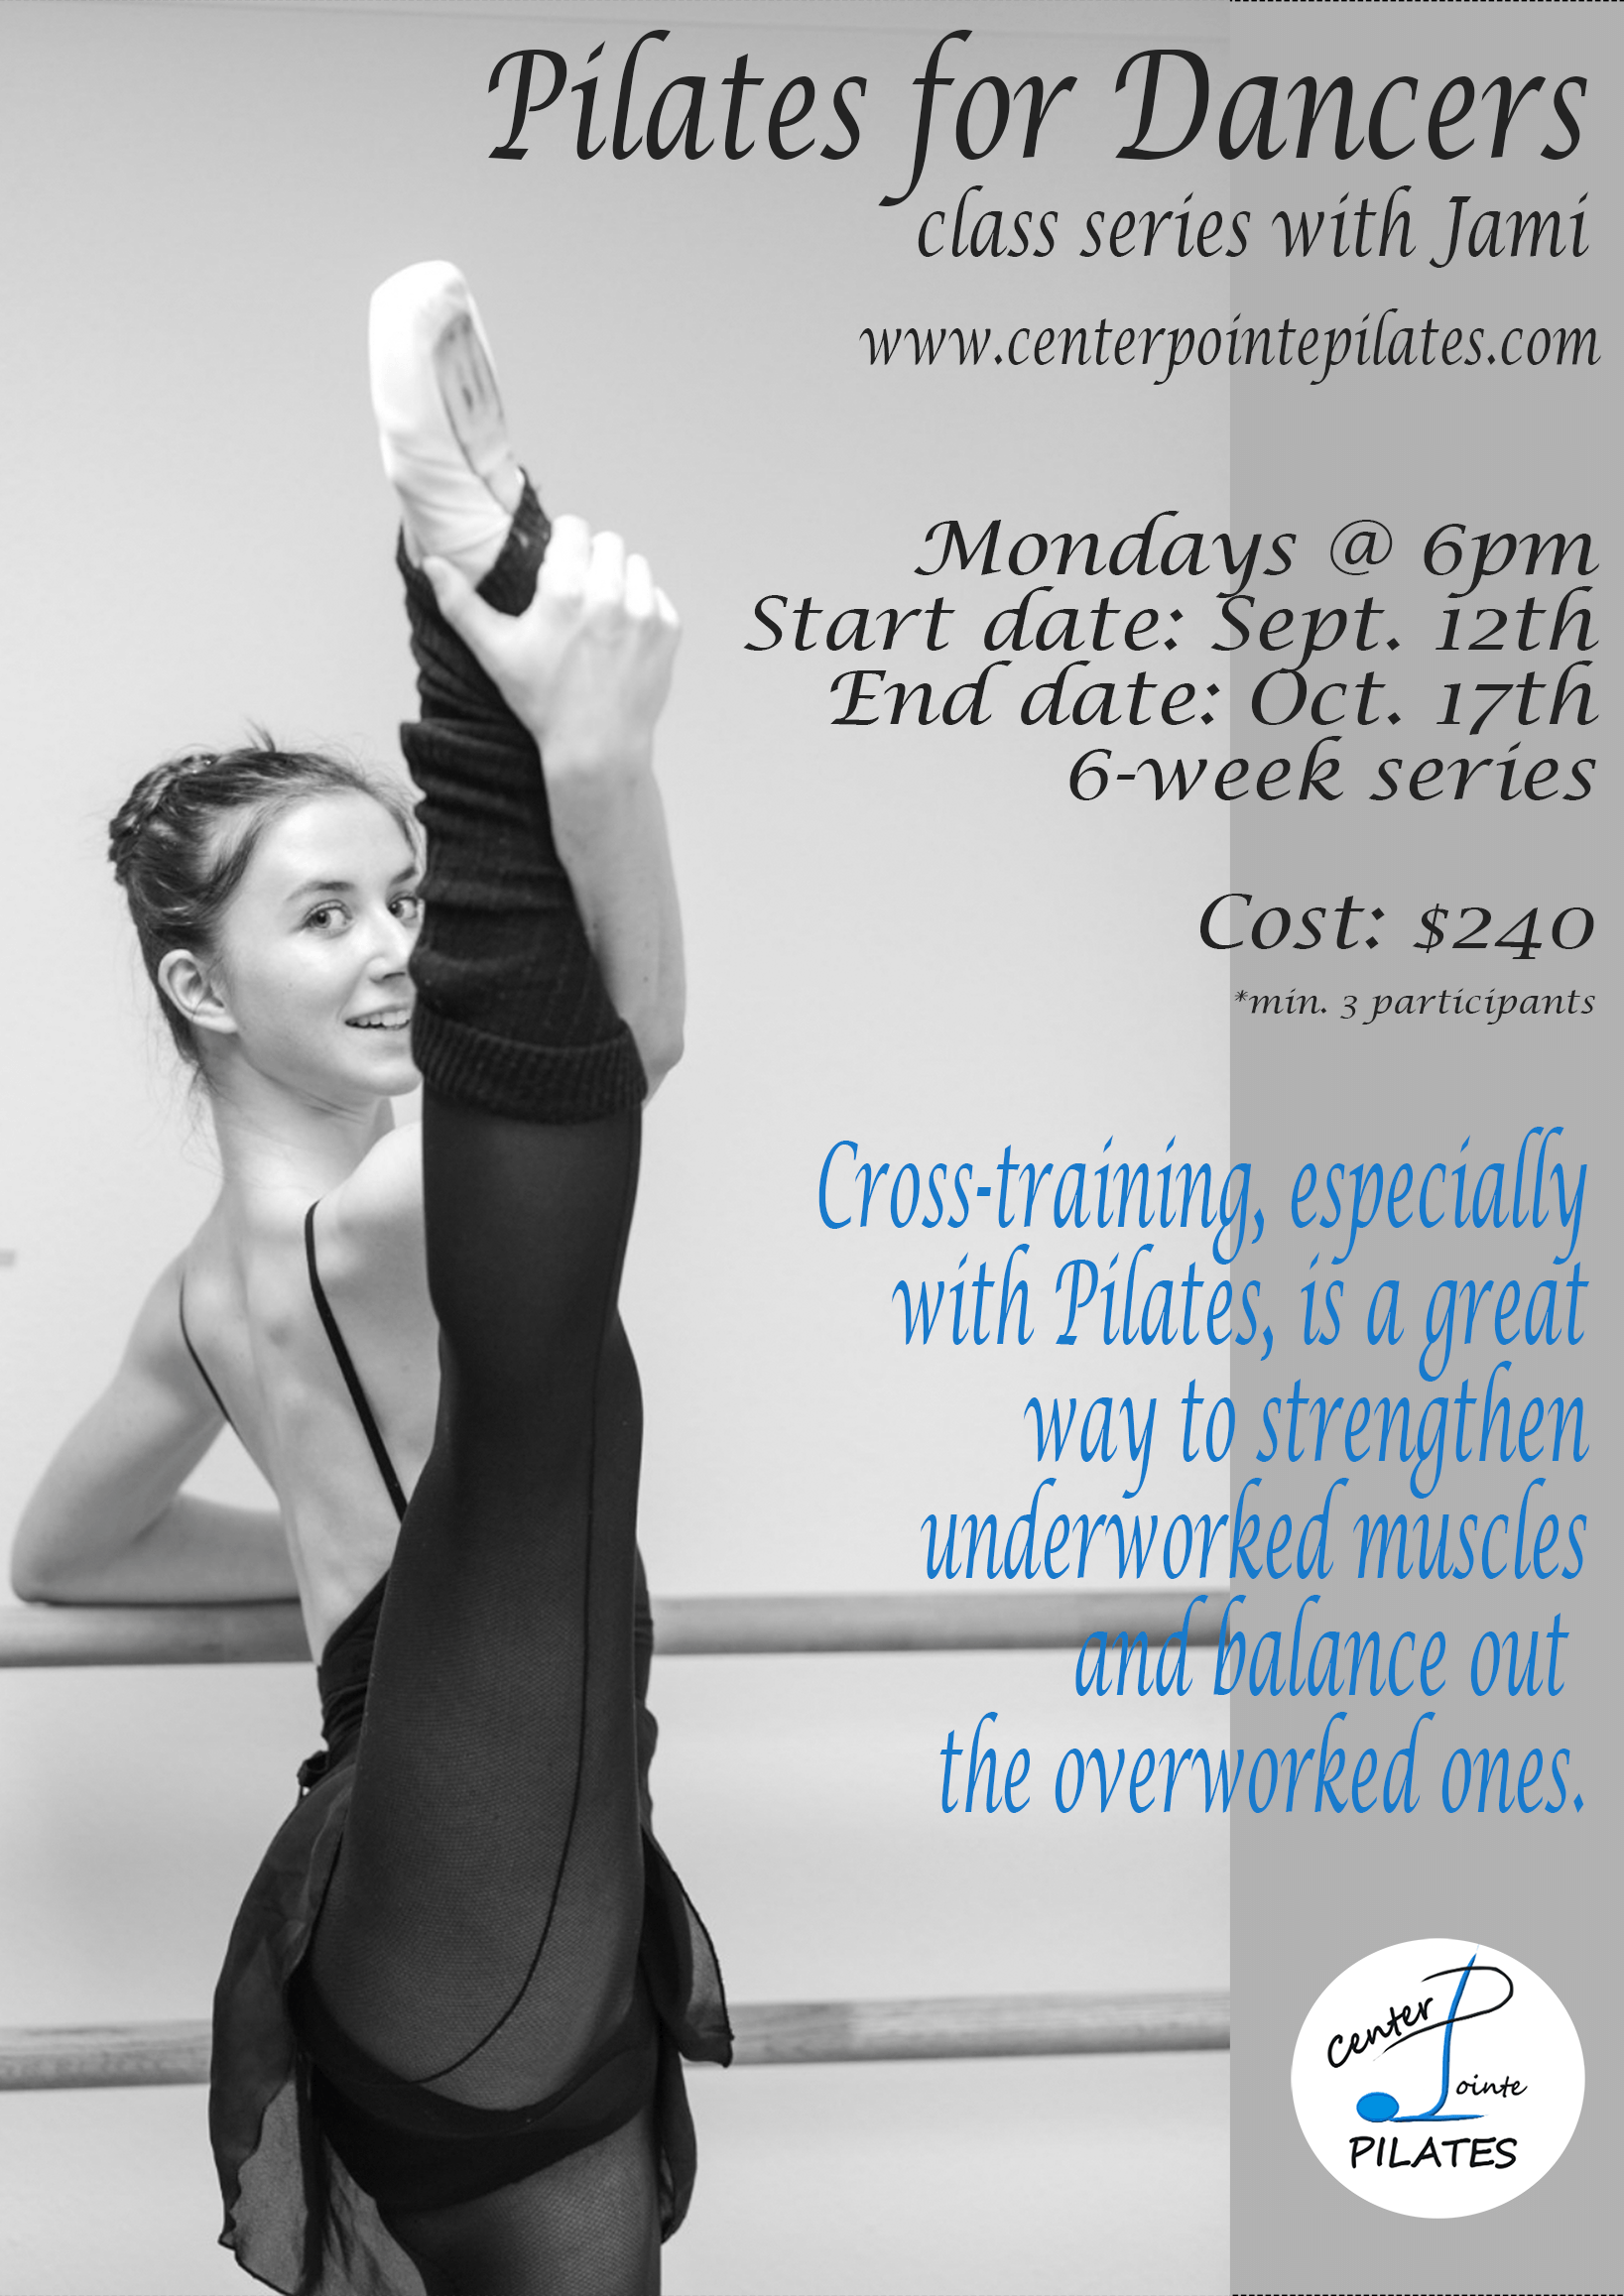 Pilates for Dancers at Center Pointe Pilates - Flyer